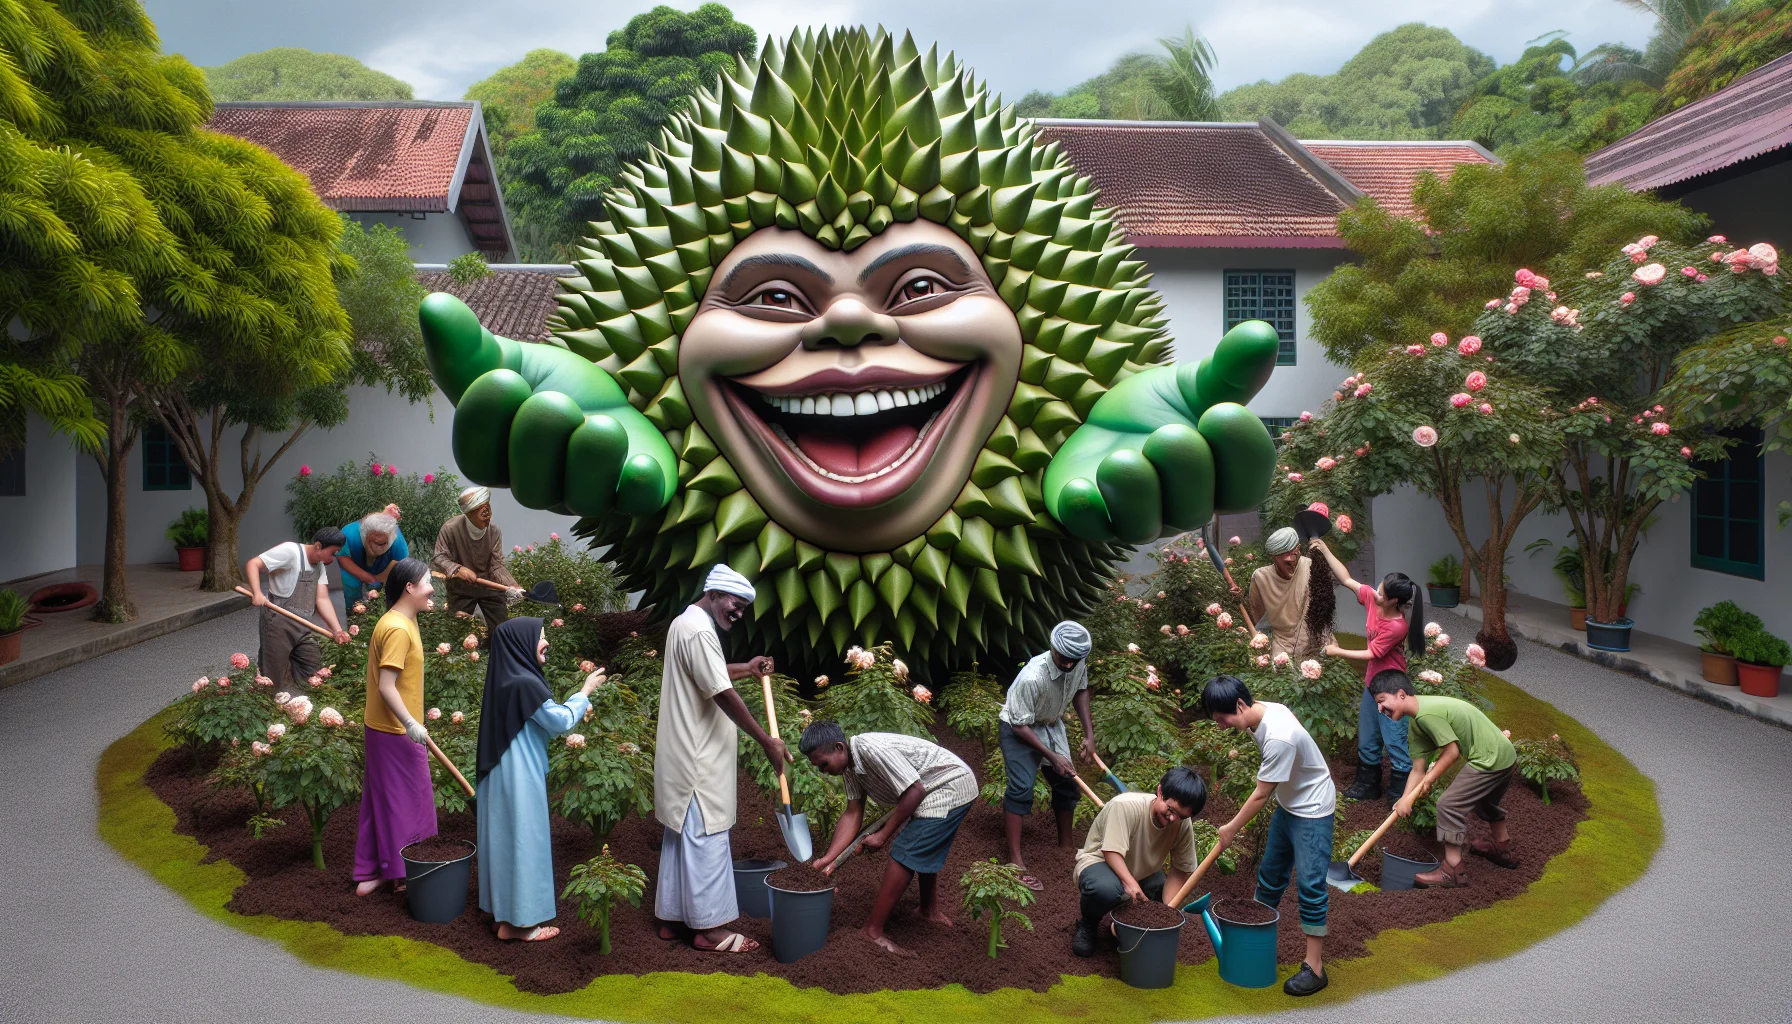 A humorous and captivating scene of an oversized, hyper-realistic durian flower involved in a lively gardening tableau. The opulent flower has a jovial expression, beckoning onlookers with green, leaf-like hands. Surrounding it, a multi-ethnic group of people, laughing and cooperating in gardening endeavors. To the left, a Caucasian male digs at the ground in preparation for planting seeds, alternating by a Black female carefully trimming rose bushes. To the right, a Middle-Eastern boy and a South Asian girl are seen collectively watering the plants, their faces exuding joy and intrigue. The whimsical atmosphere should convey the enjoyment and fulfillment derived from gardening.